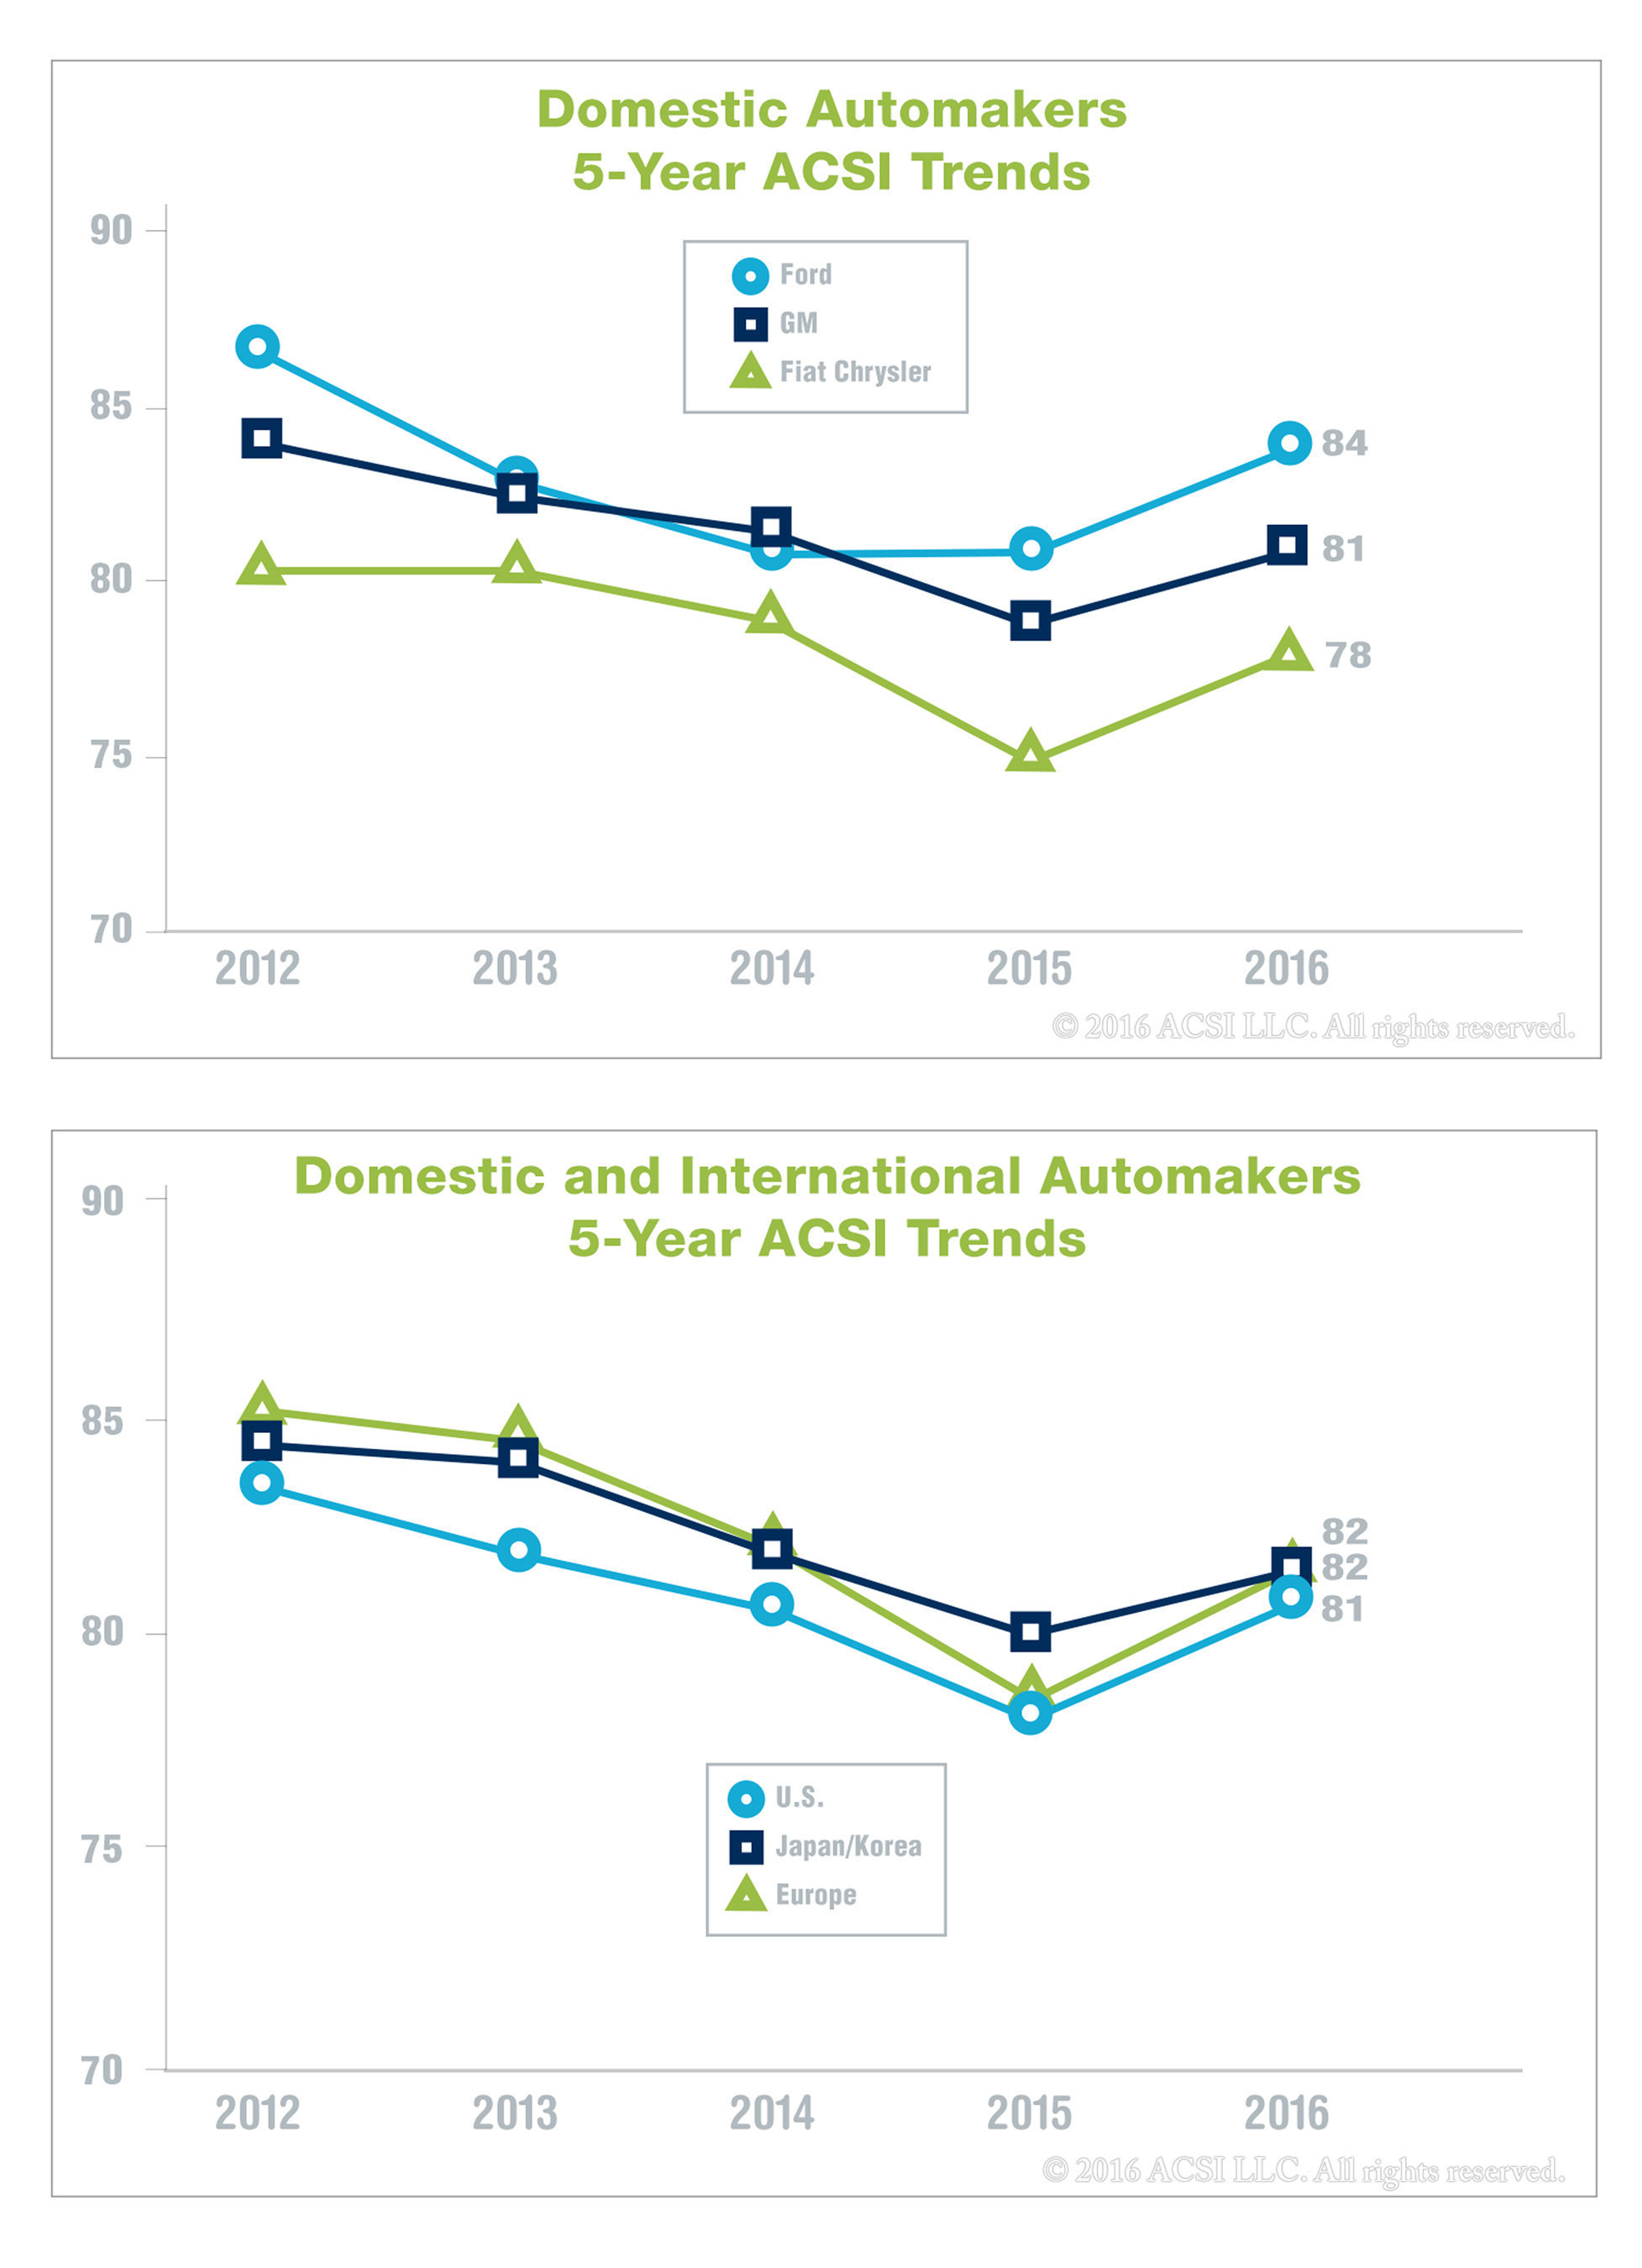 ACSI 5-year Auto Industry Trends